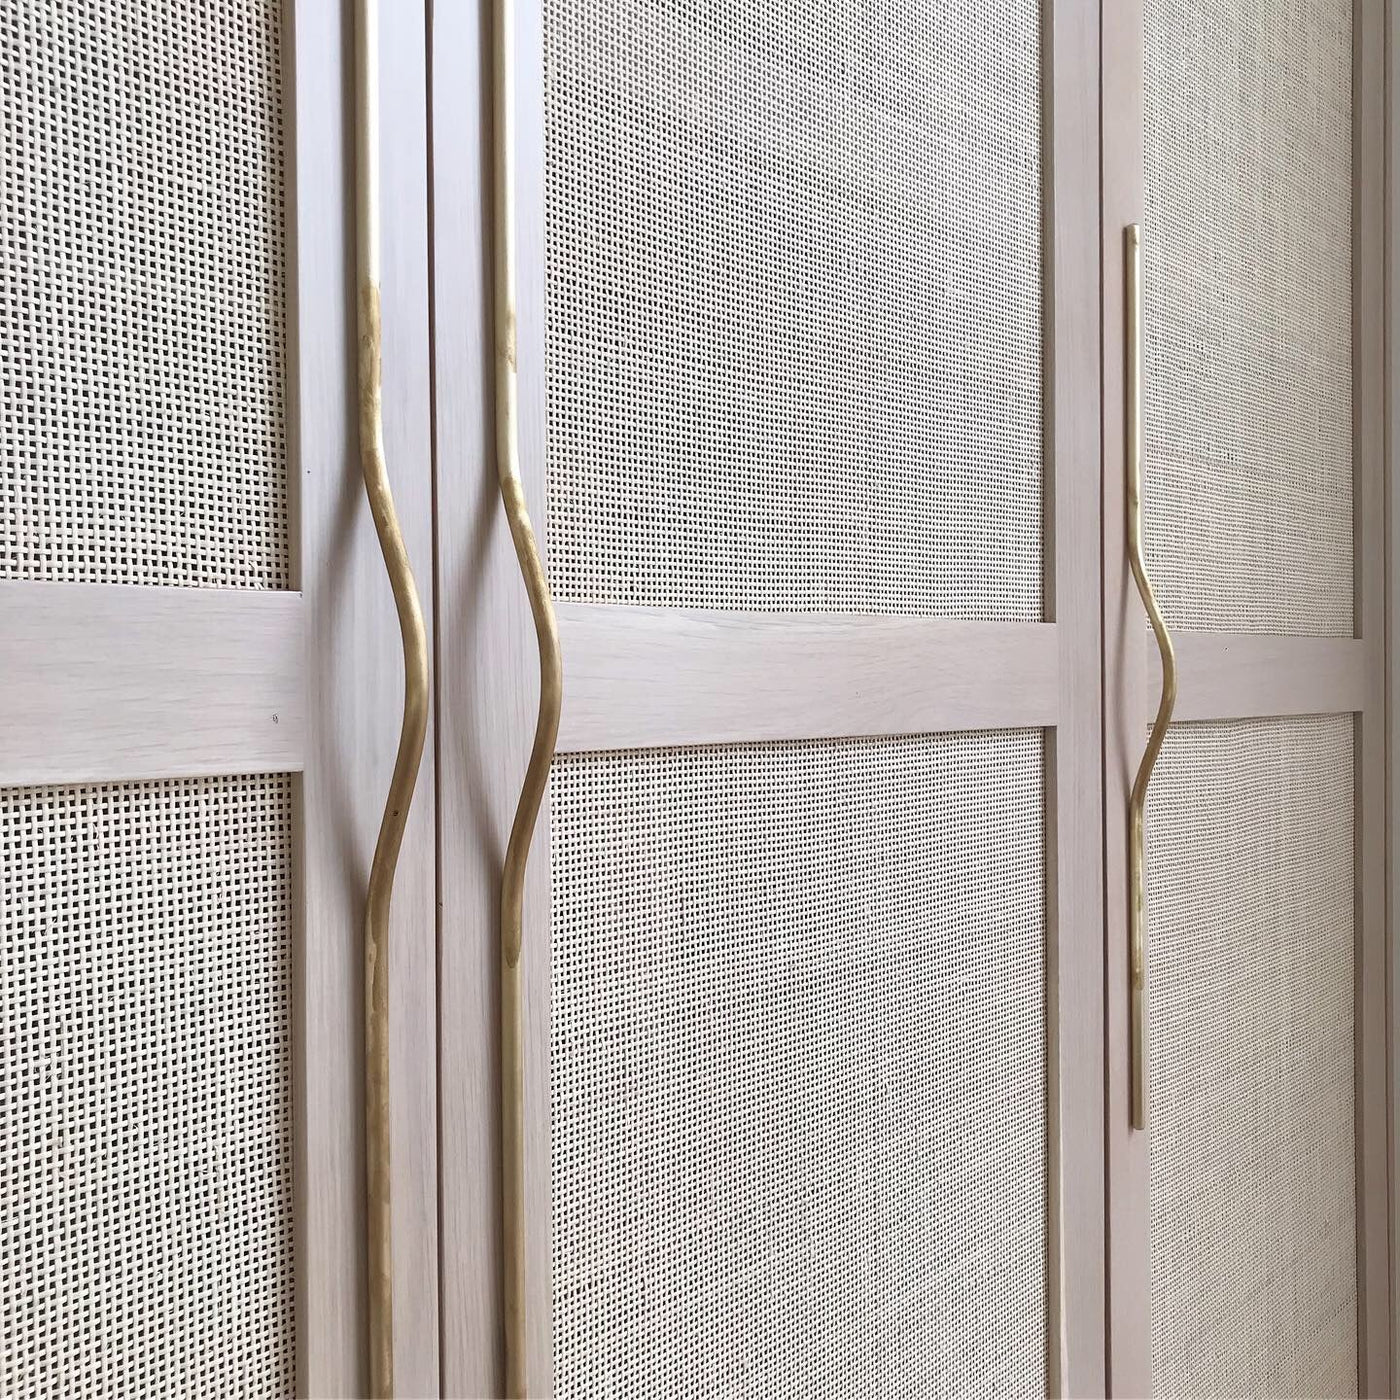 A close up of a white cabinet with Jeroen van de Gruiter's Pulse Line Handles in gold.